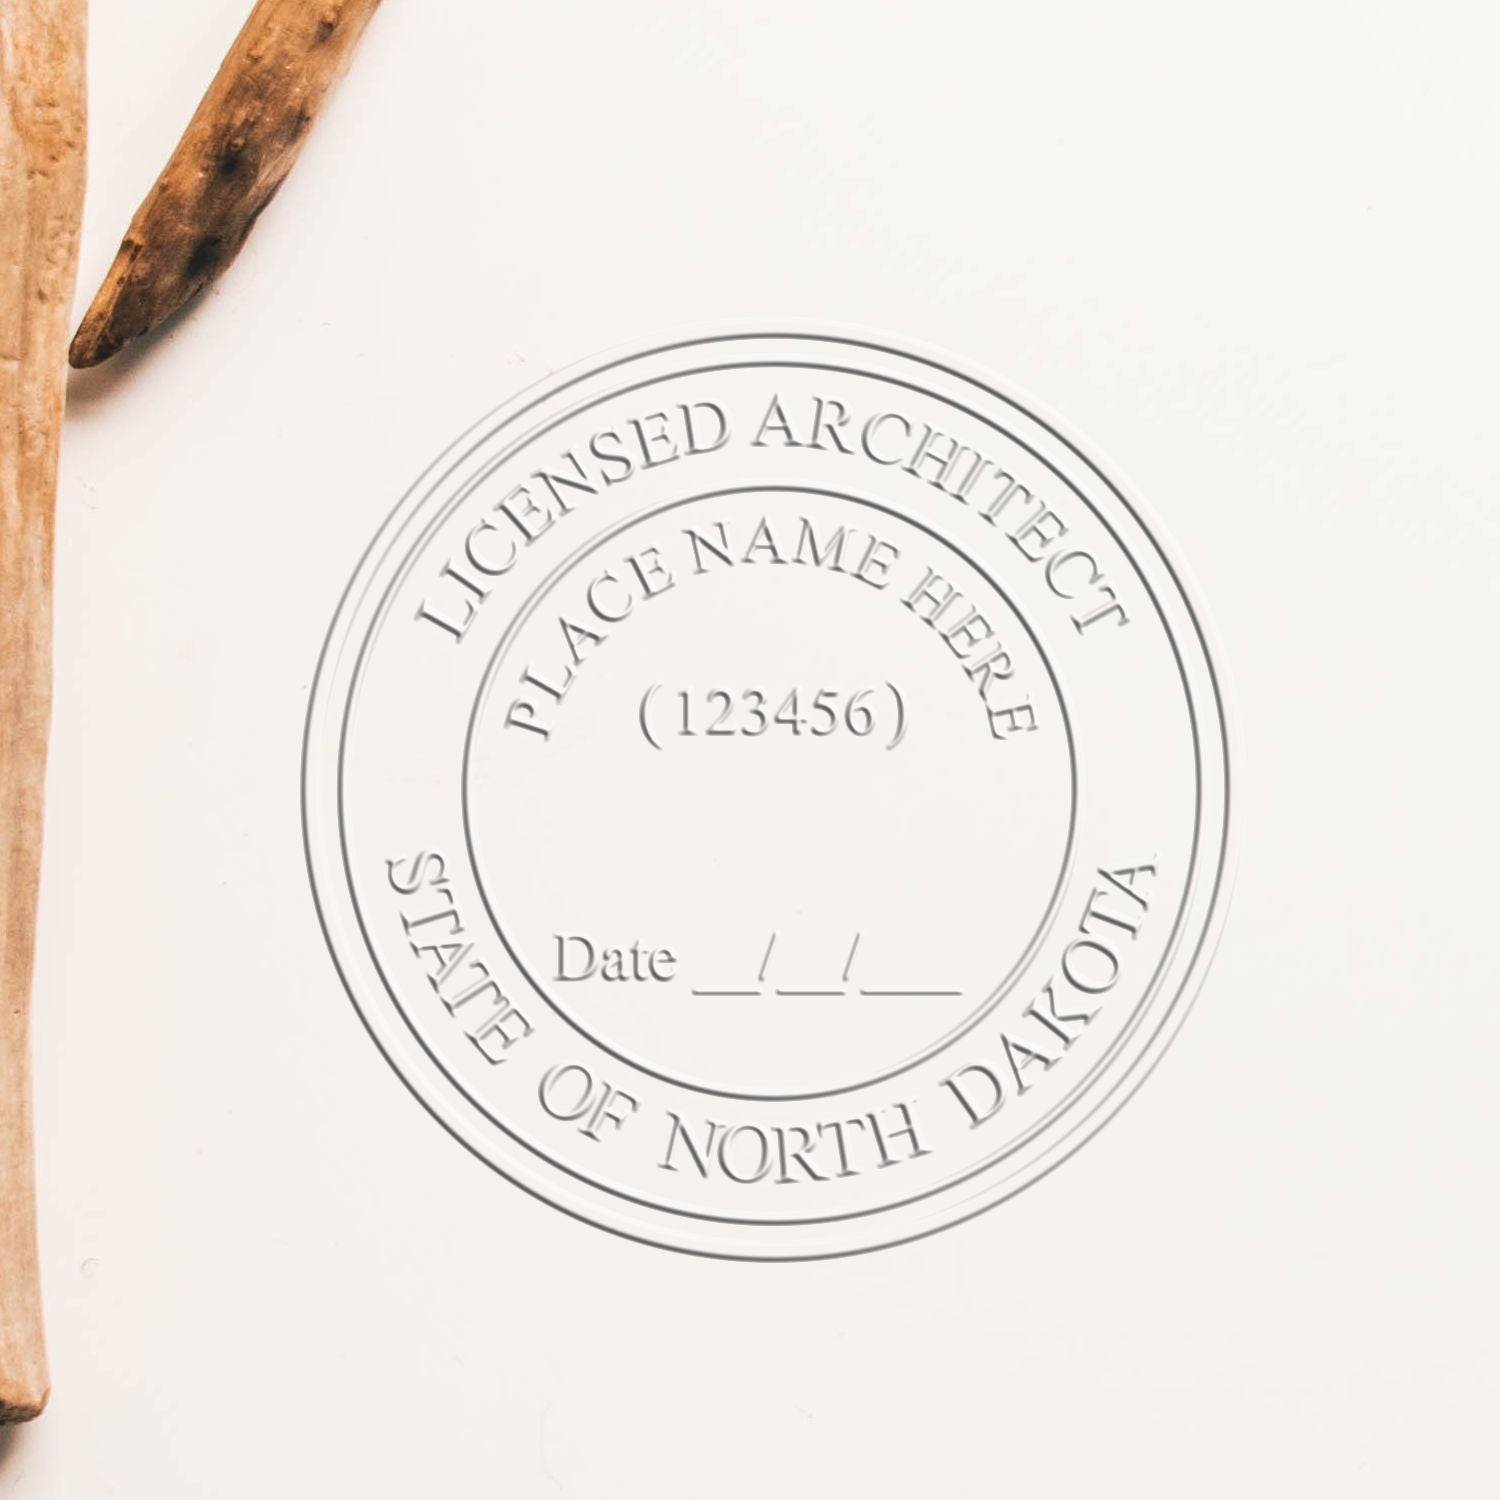 A lifestyle photo showing a stamped image of the North Dakota Desk Architect Embossing Seal on a piece of paper